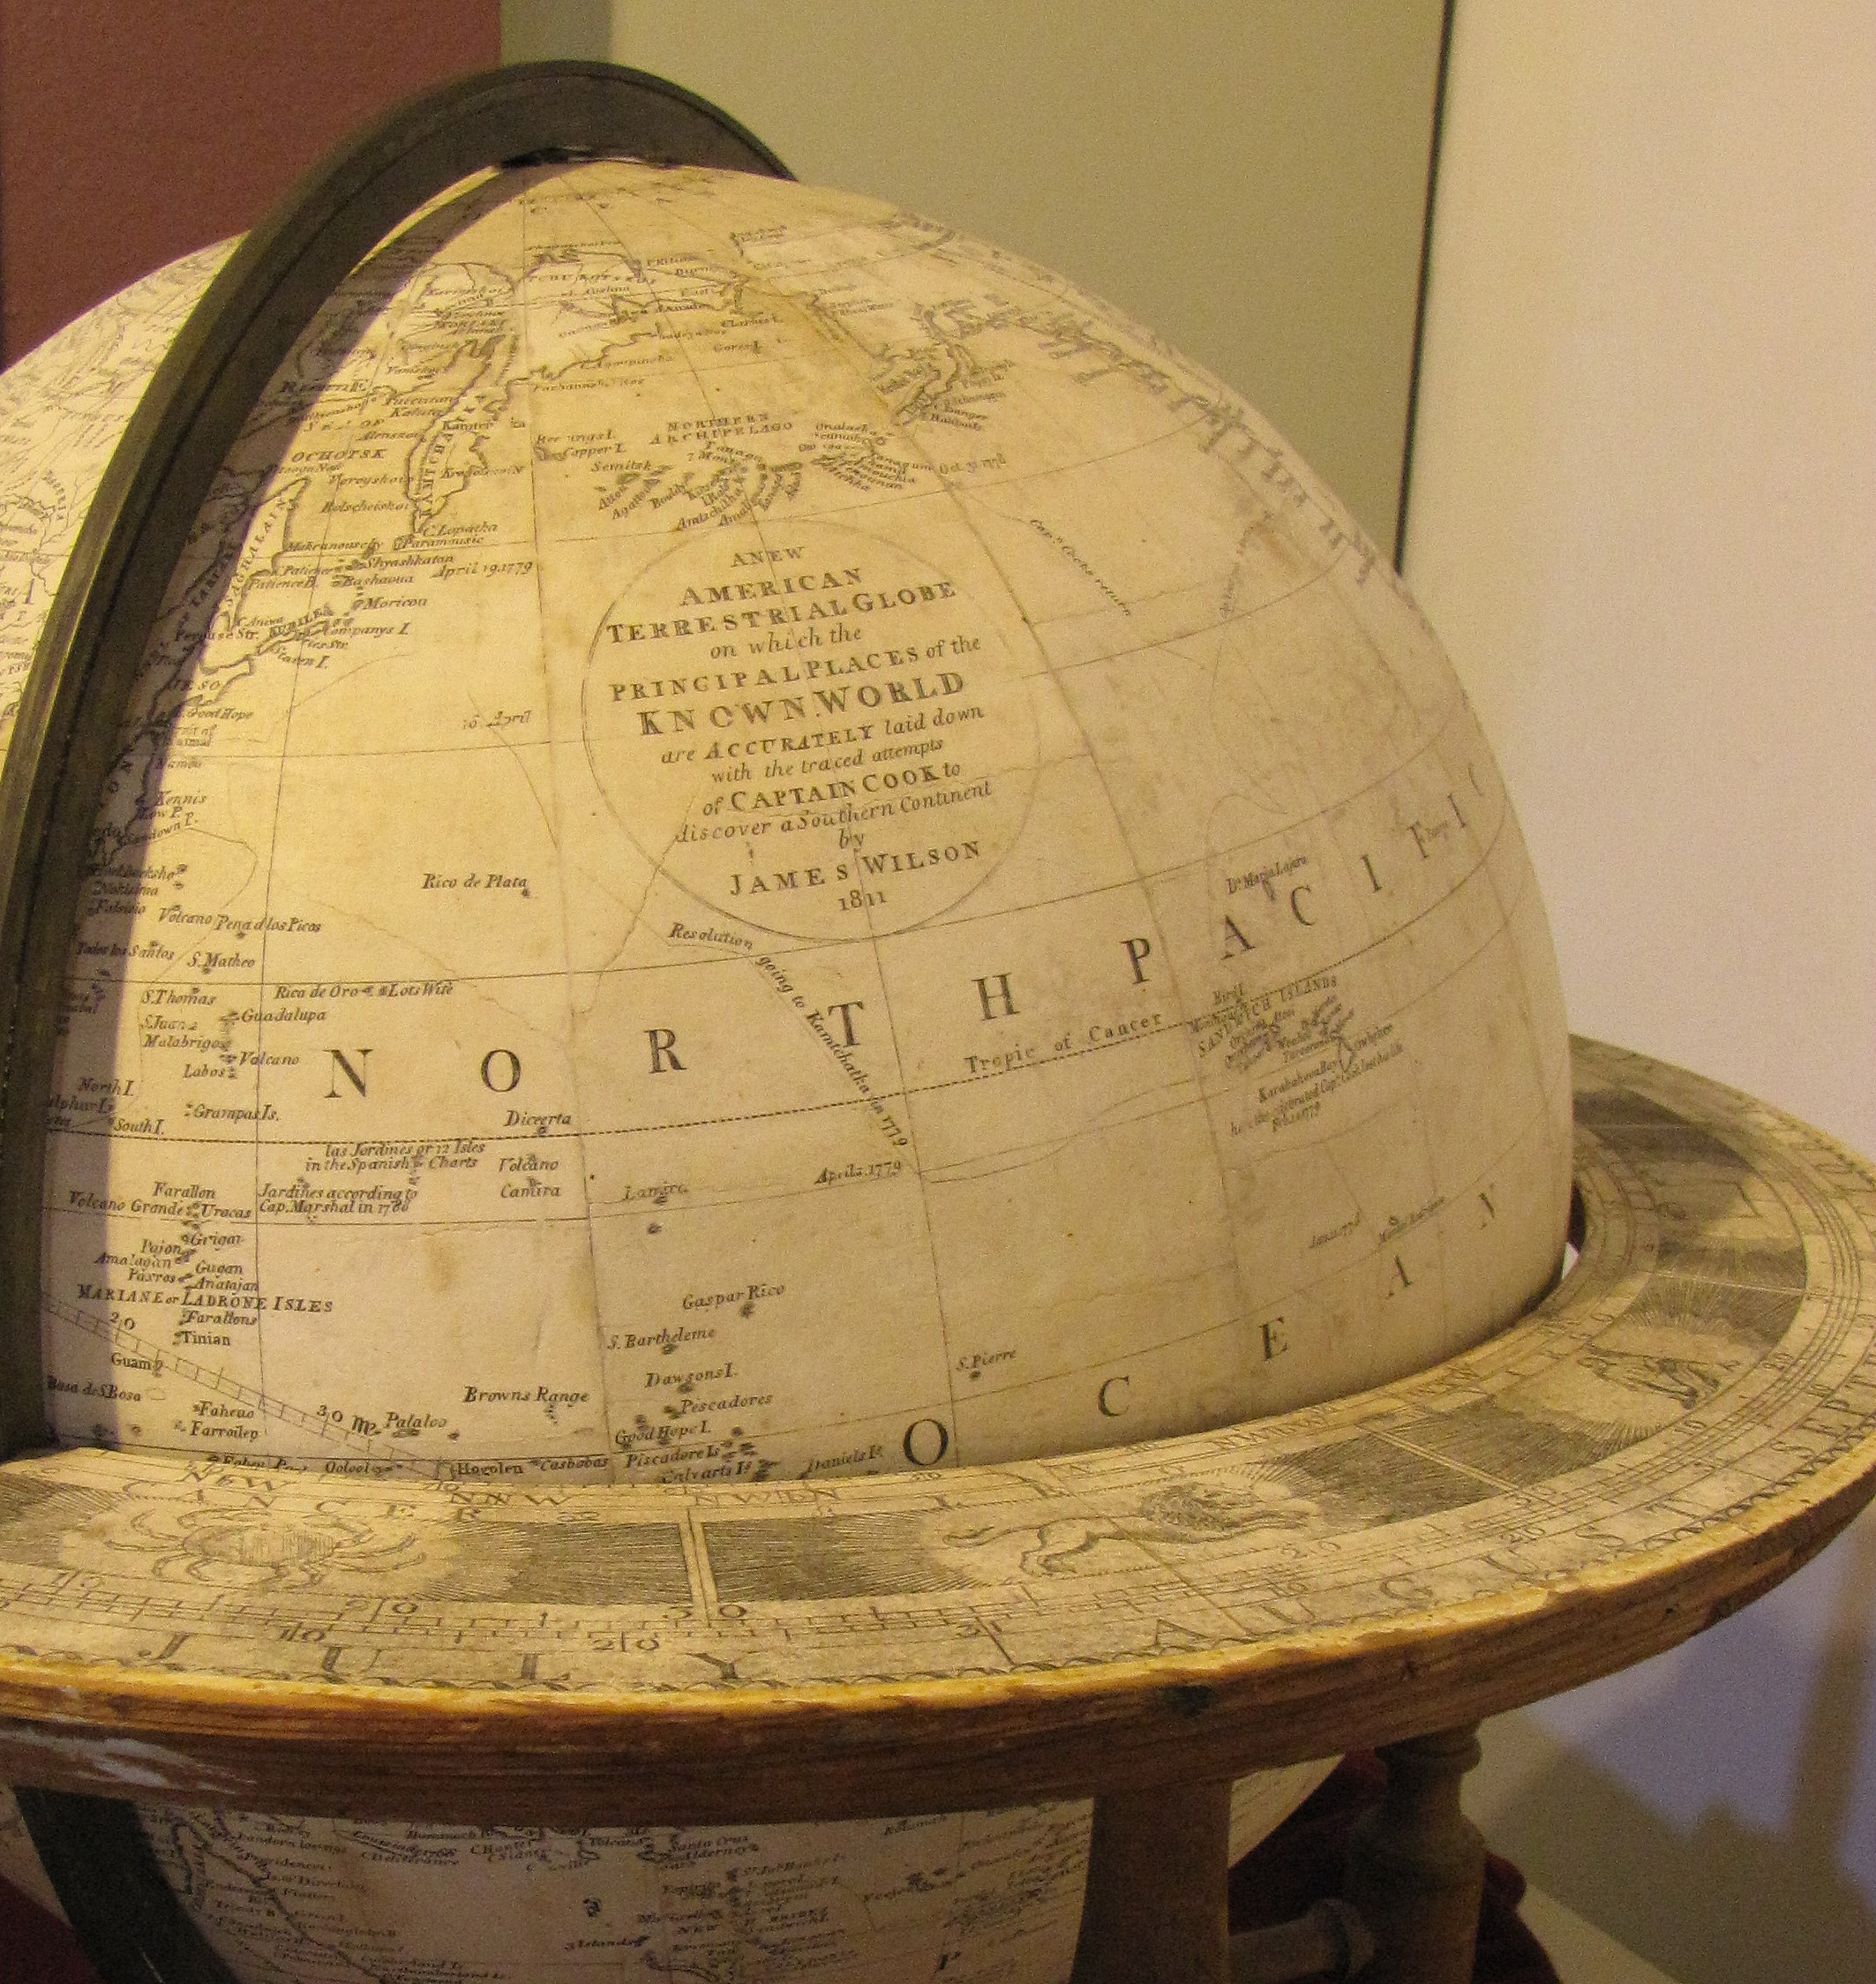 Widely considered to be the first successful globe maker of the New World, James Wilson was born in Londonderry, New Hampshire and moved as an adult to Bradford, Vermont.  He was self-taught, producing his first globes in 1810.  The first dated edition is the 1811, 13 1/2” style shown here.  It accurately depicts the principal places of the known world, including the route taken by Captain James Cook in his attempts to discover a southern continent.  Few of his globes are known to exist today.    This globe was used for many years in Dr. Ebenezer Lerned’s (1787-1831) Hopkinton Academy.  The Society’s 1875 catalogue has the following entry for the globe:  “…This Globe was willed by the late DR. EBENZER LEARNED, of HOPKINTON, to STEPHEN SIBLEY, ESQ., in whose Garret it was slightly injured by Rain.  When ’SQUIRE SIBLEY died, it was returned, and on the 29th of May, 1873, presented by DR. LEARNED’S Daughters to the PHILOMATHIC CLUB…”  The globe was restored in 2008/09 by Northeast Document Conservation Center of Andover, Massachusetts.